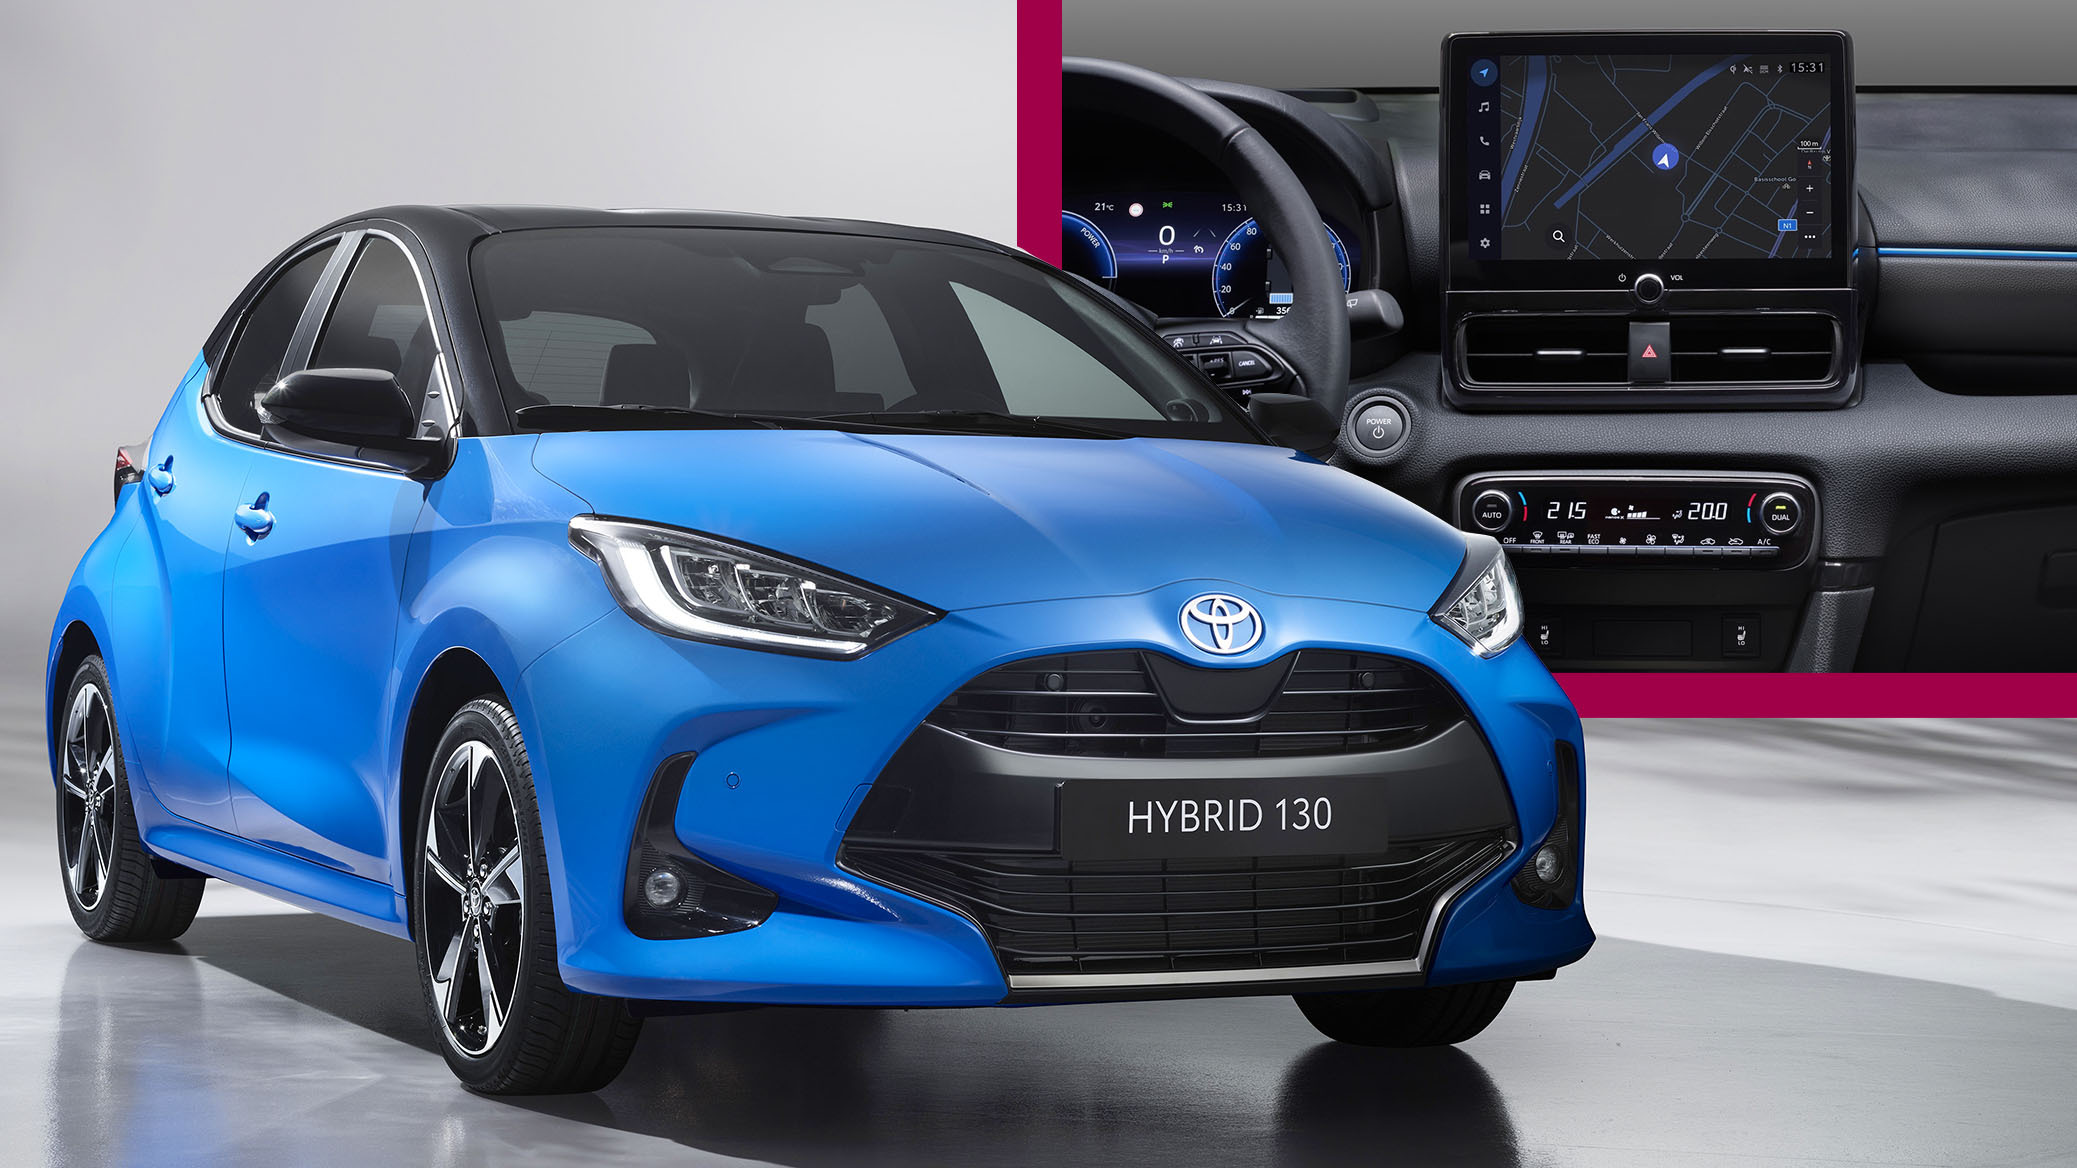 Toyota GR Yaris Lineup: Toyota GR Yaris line-up revealed, to go on